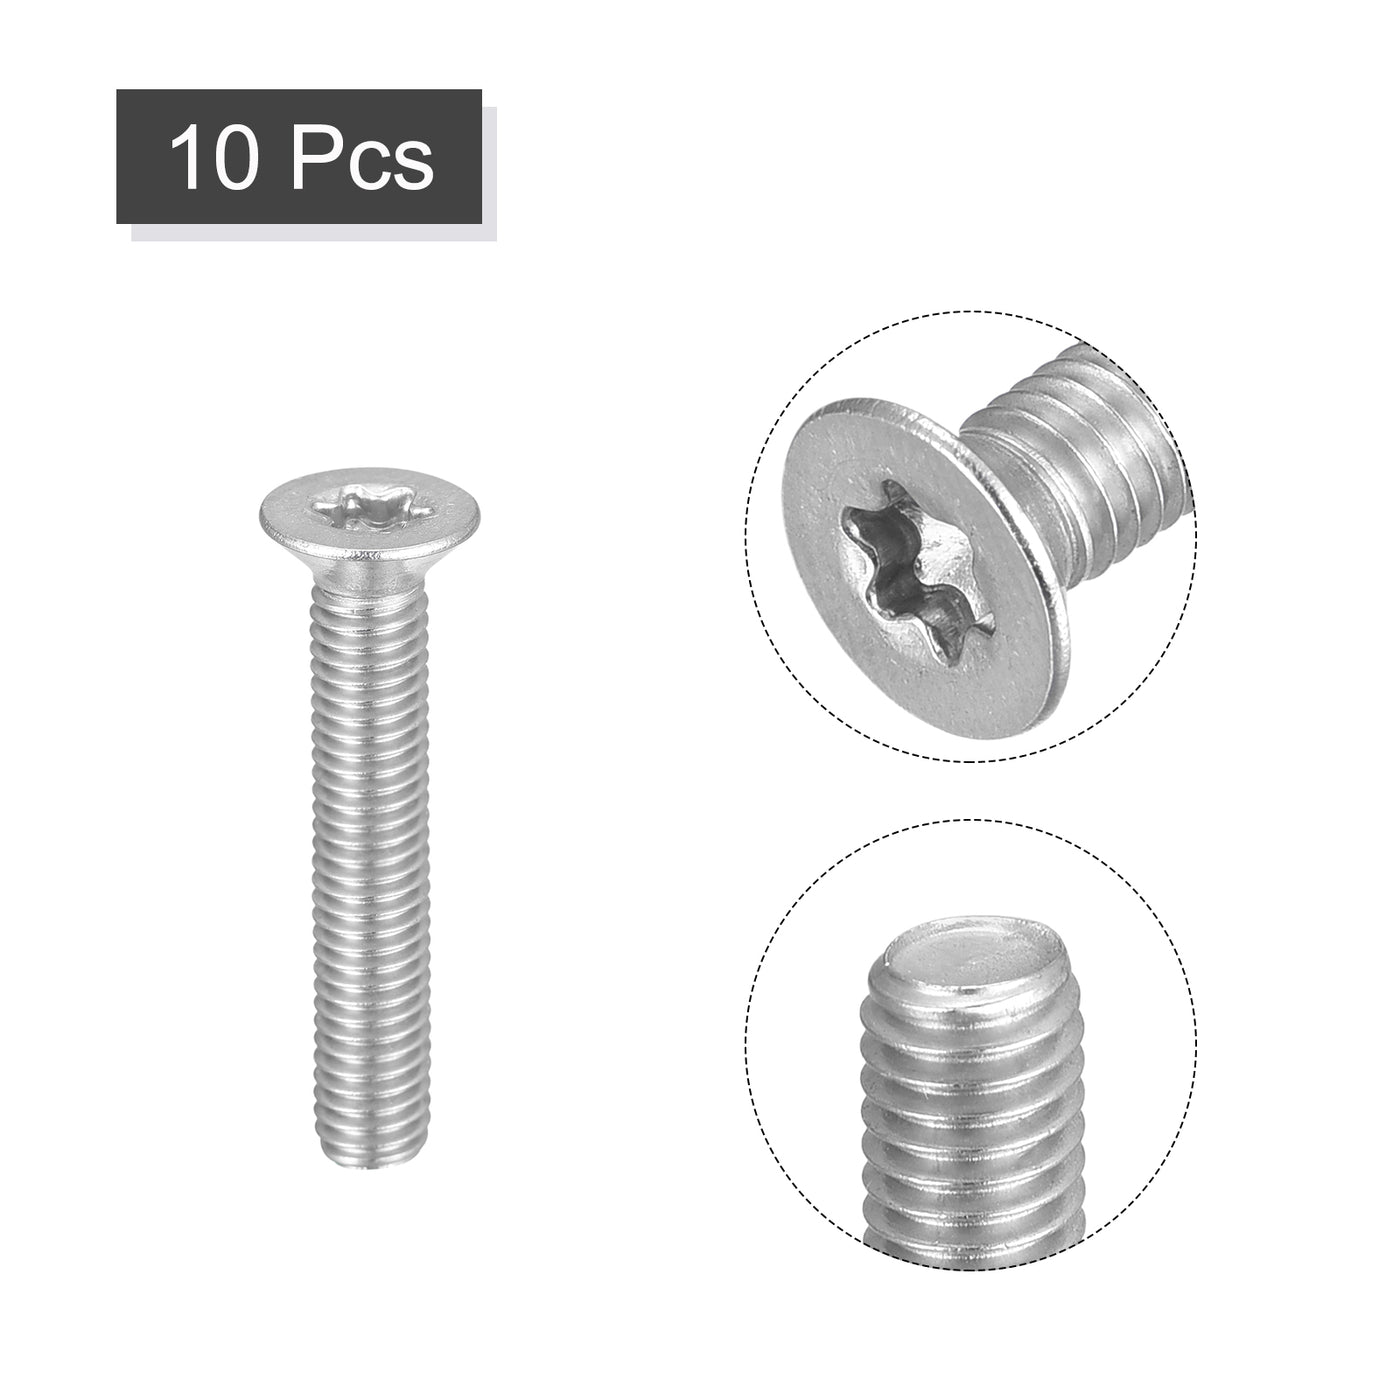 uxcell Uxcell M5x30mm Torx Security Screws, 10pcs 316 Stainless Steel Countersunk Head Screw